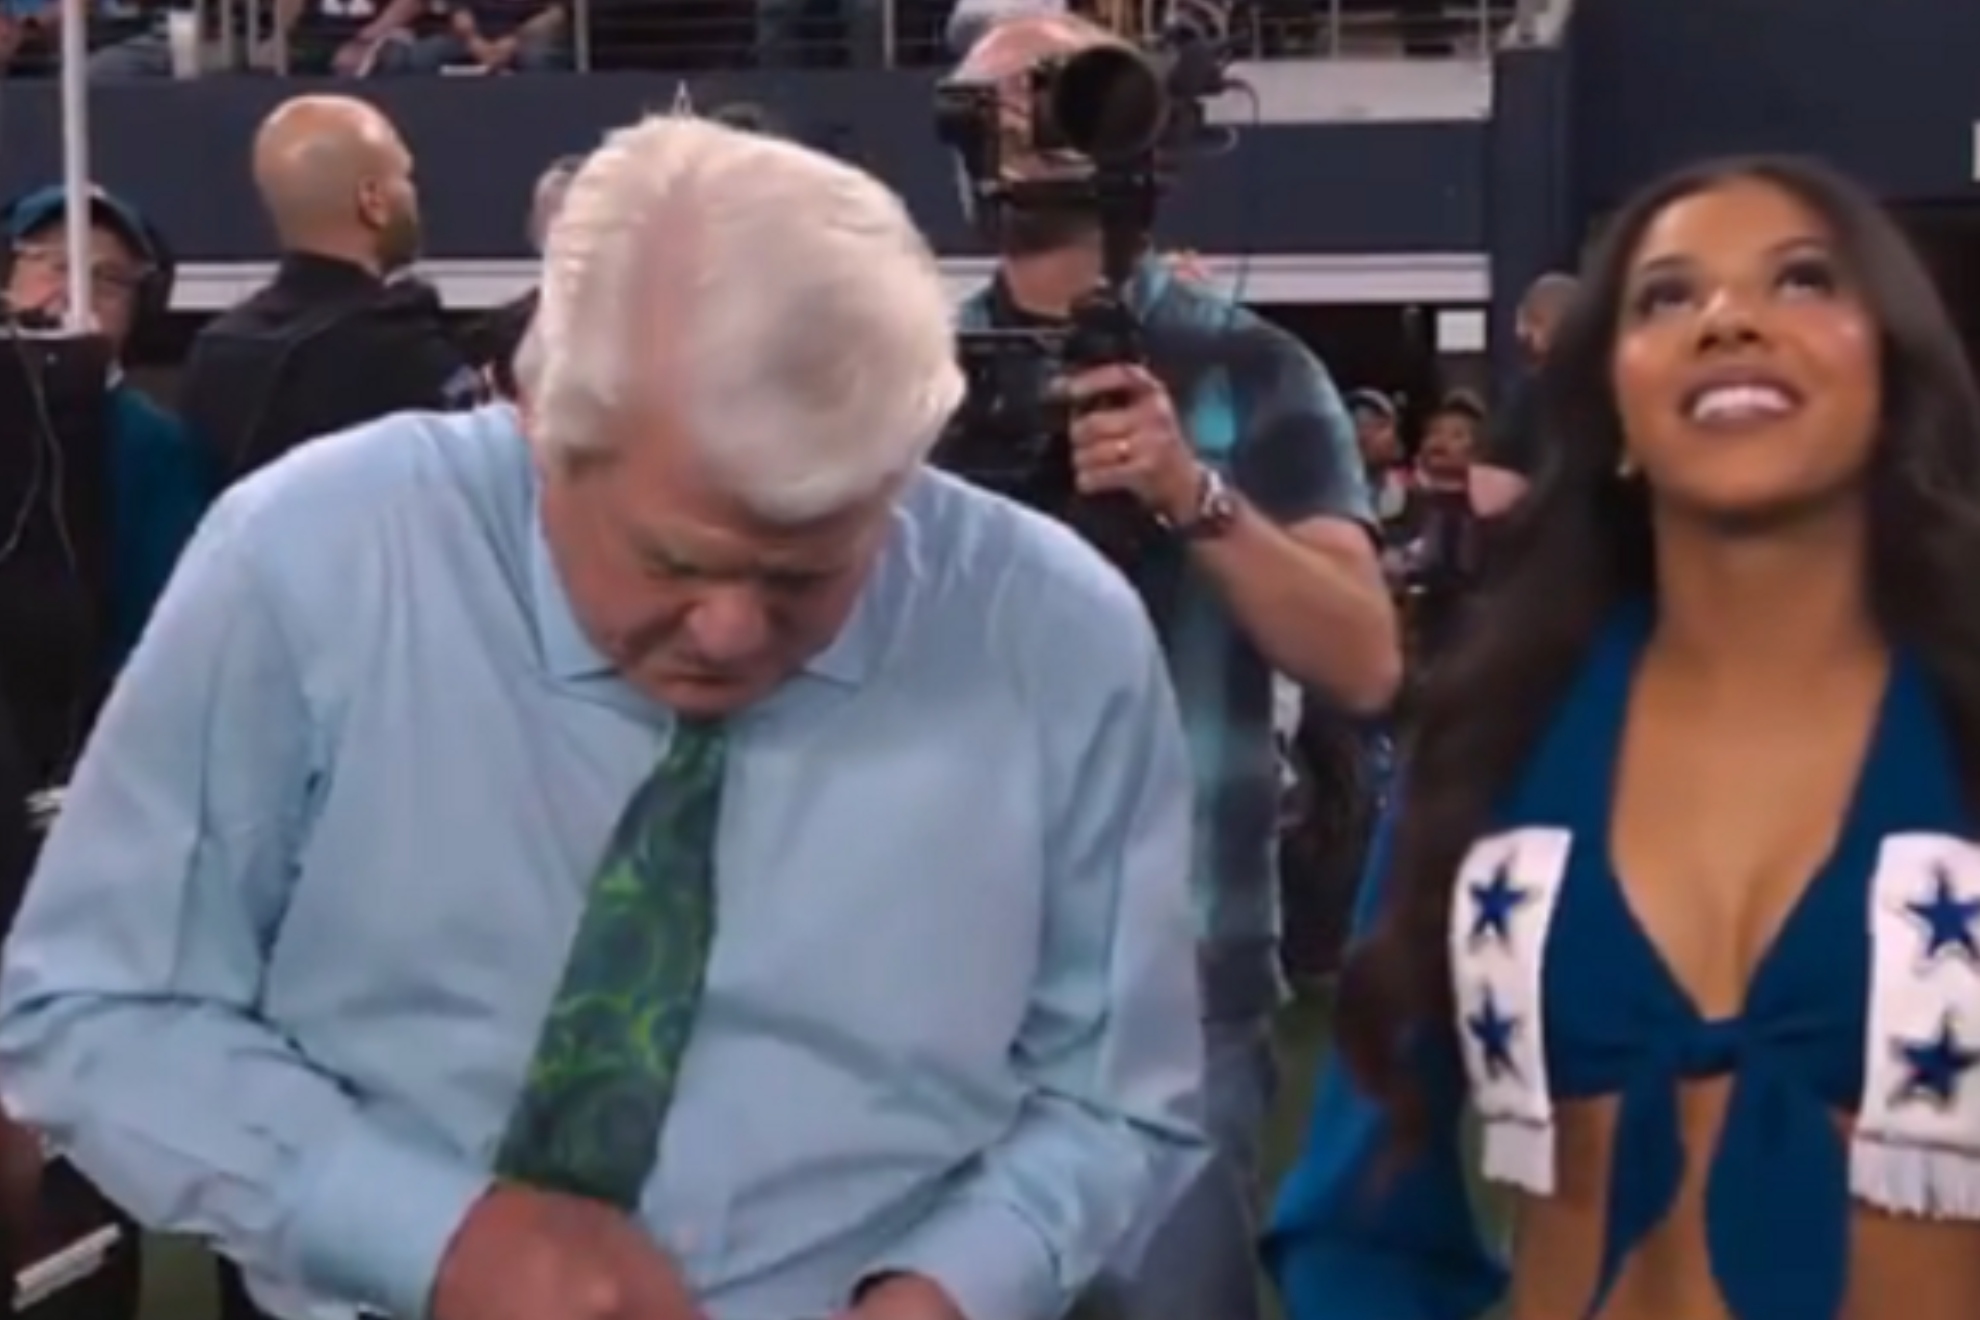 Cowboy fans laugh at Jimmy Johnson after unfortunate camera moment next to cheerleader during honor ceremony